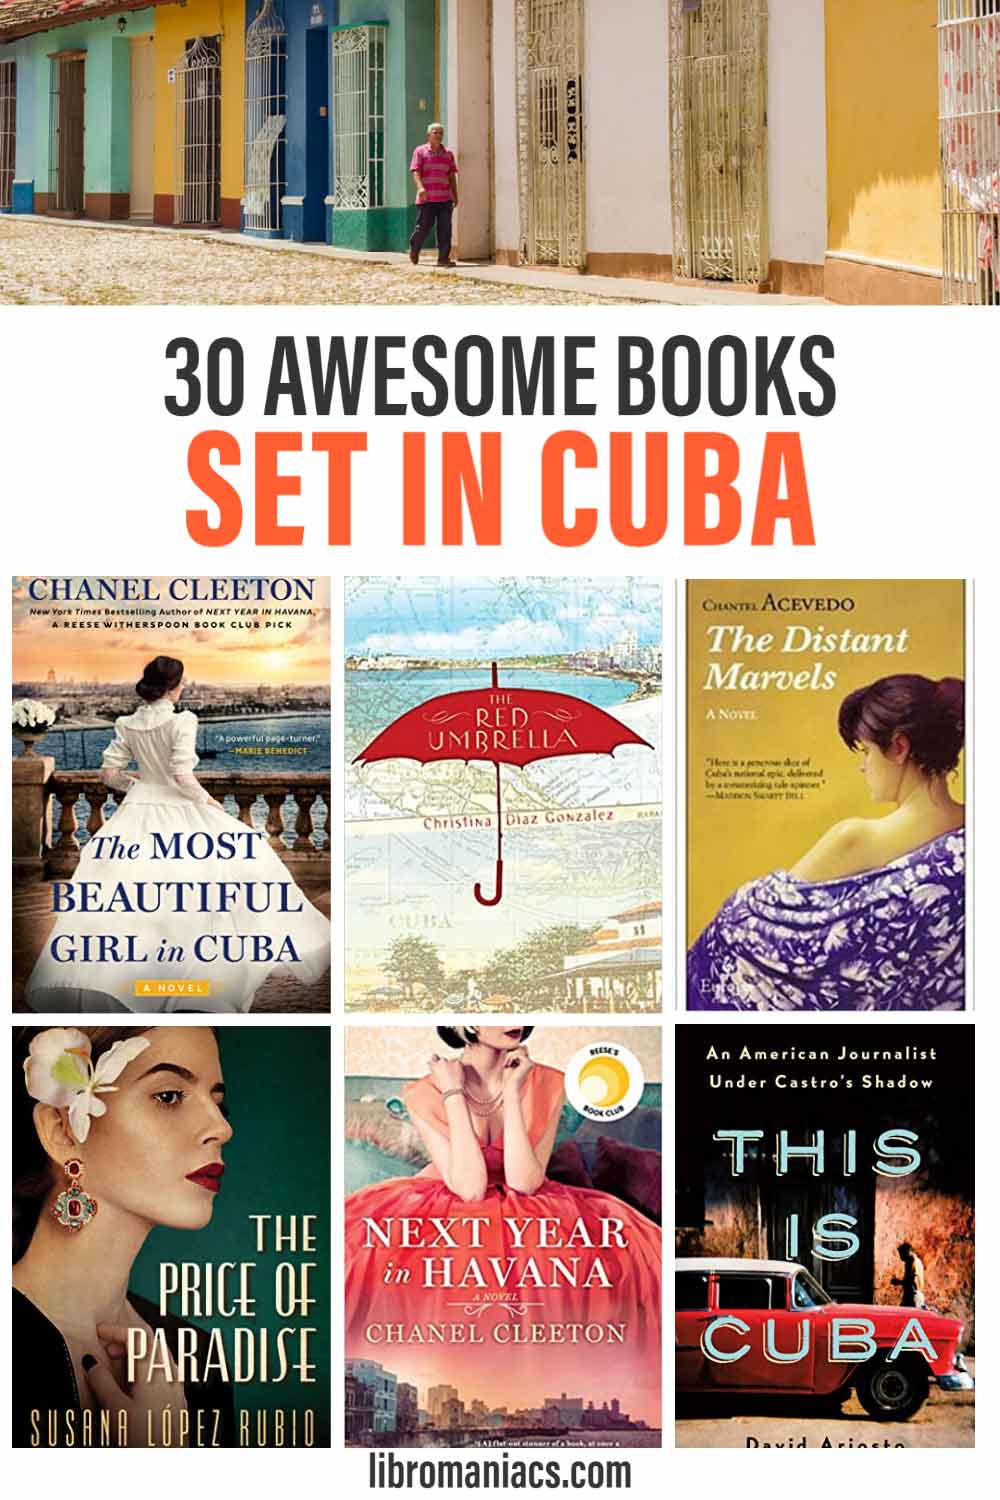 30 awesome book set in Cuba